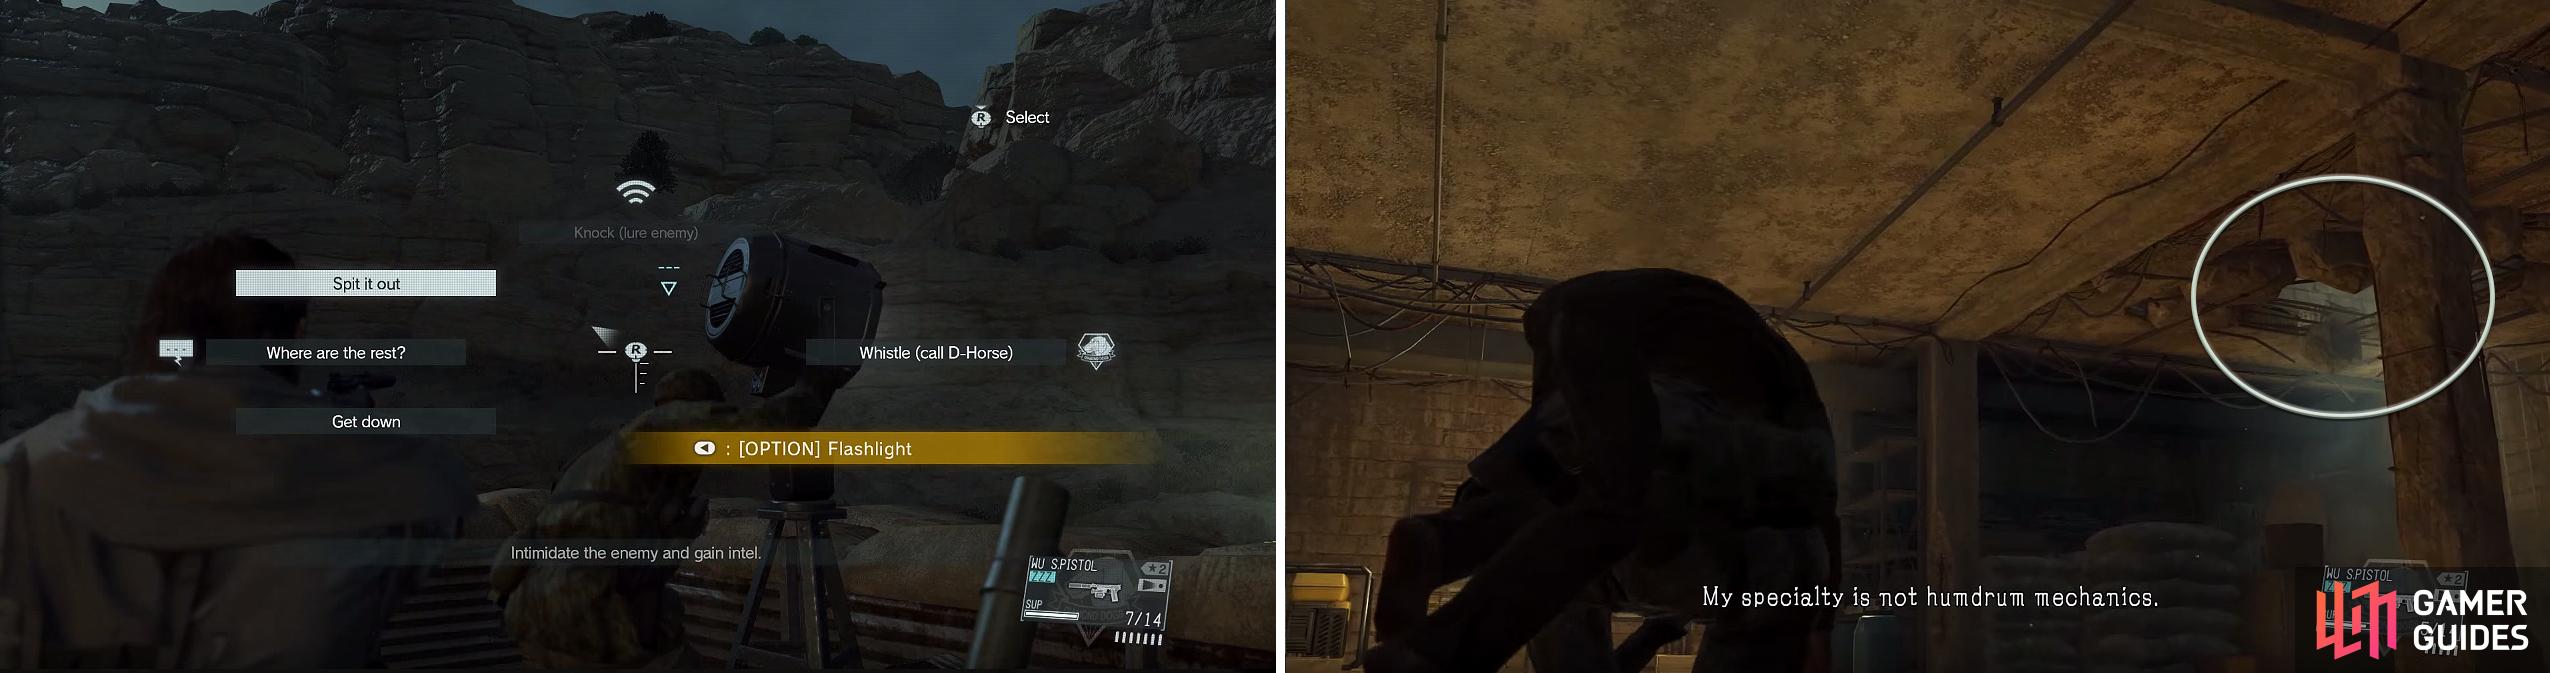 Interrogating enemies (left) is crucial to completing missions in an easy manner. Once you’ve found the engineer, extract him through the hole in the roof (right).